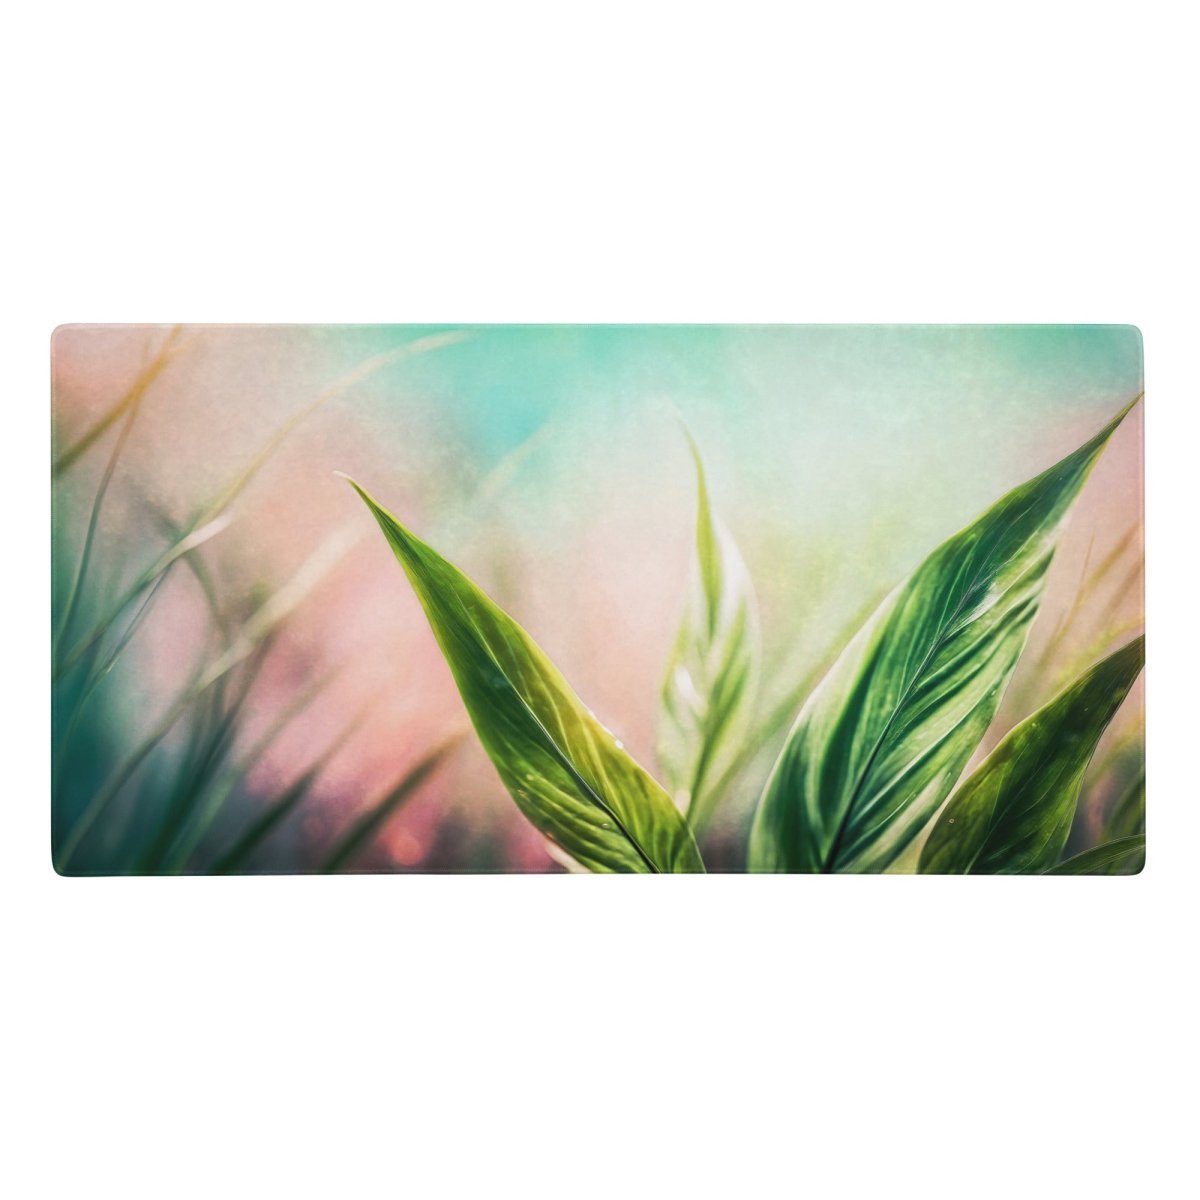 Verdant foliage - Gaming mouse pad - Ever colorful